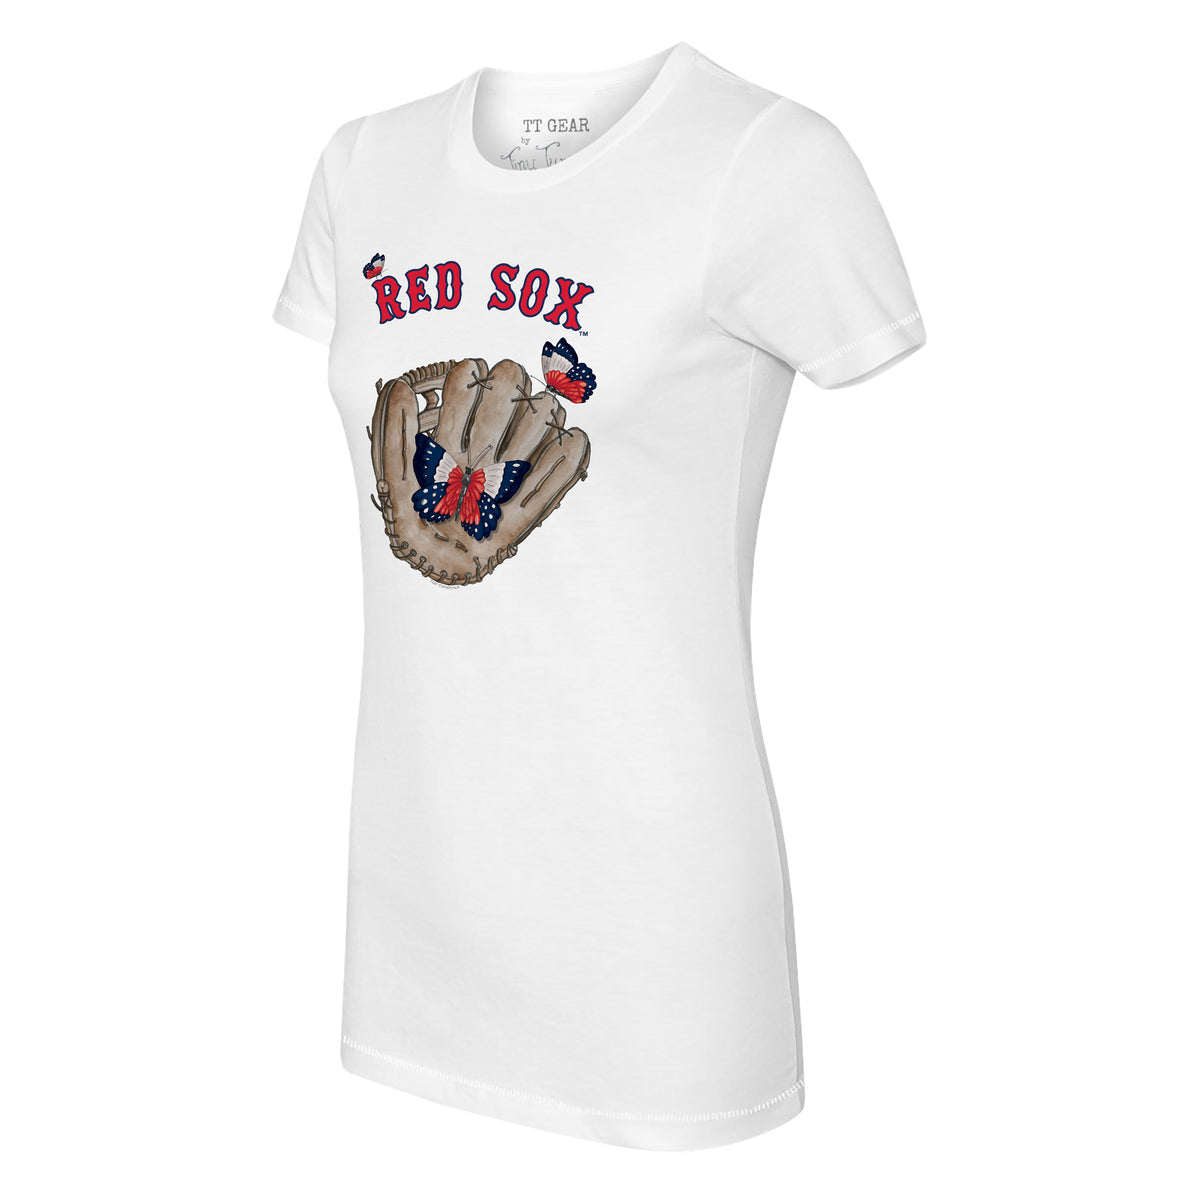 Boston Red Sox Butterfly Glove Tee Shirt